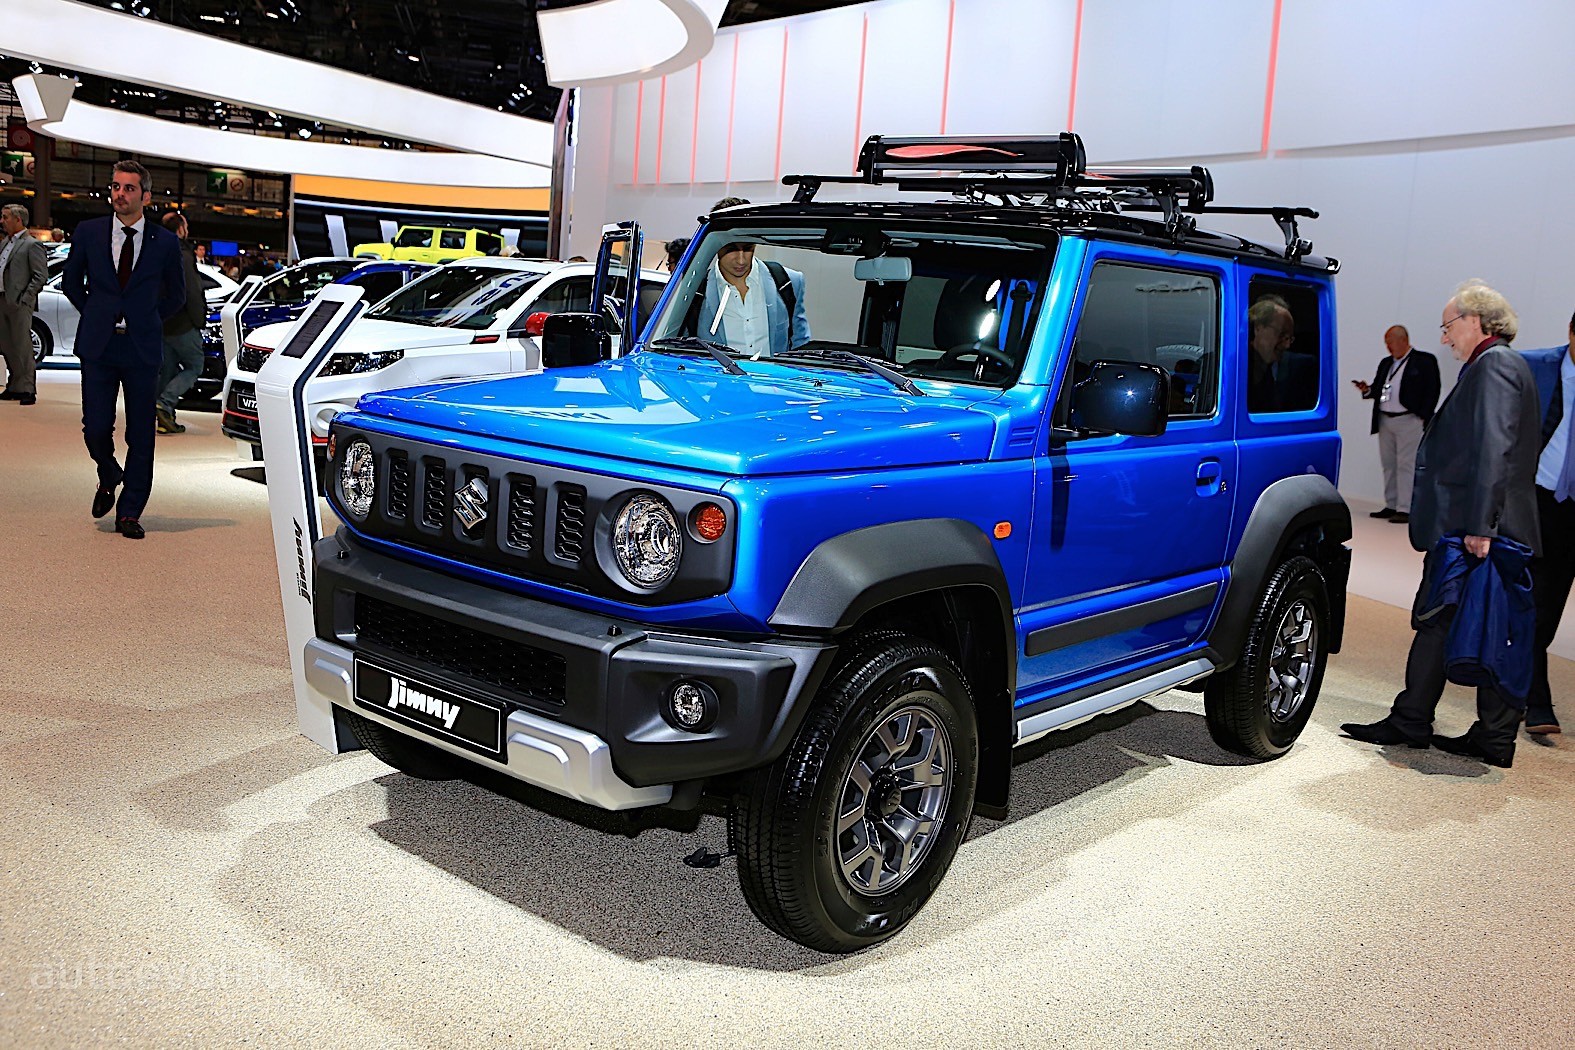 2019-suzuki-jimny-is-out-for-suv-blood-i